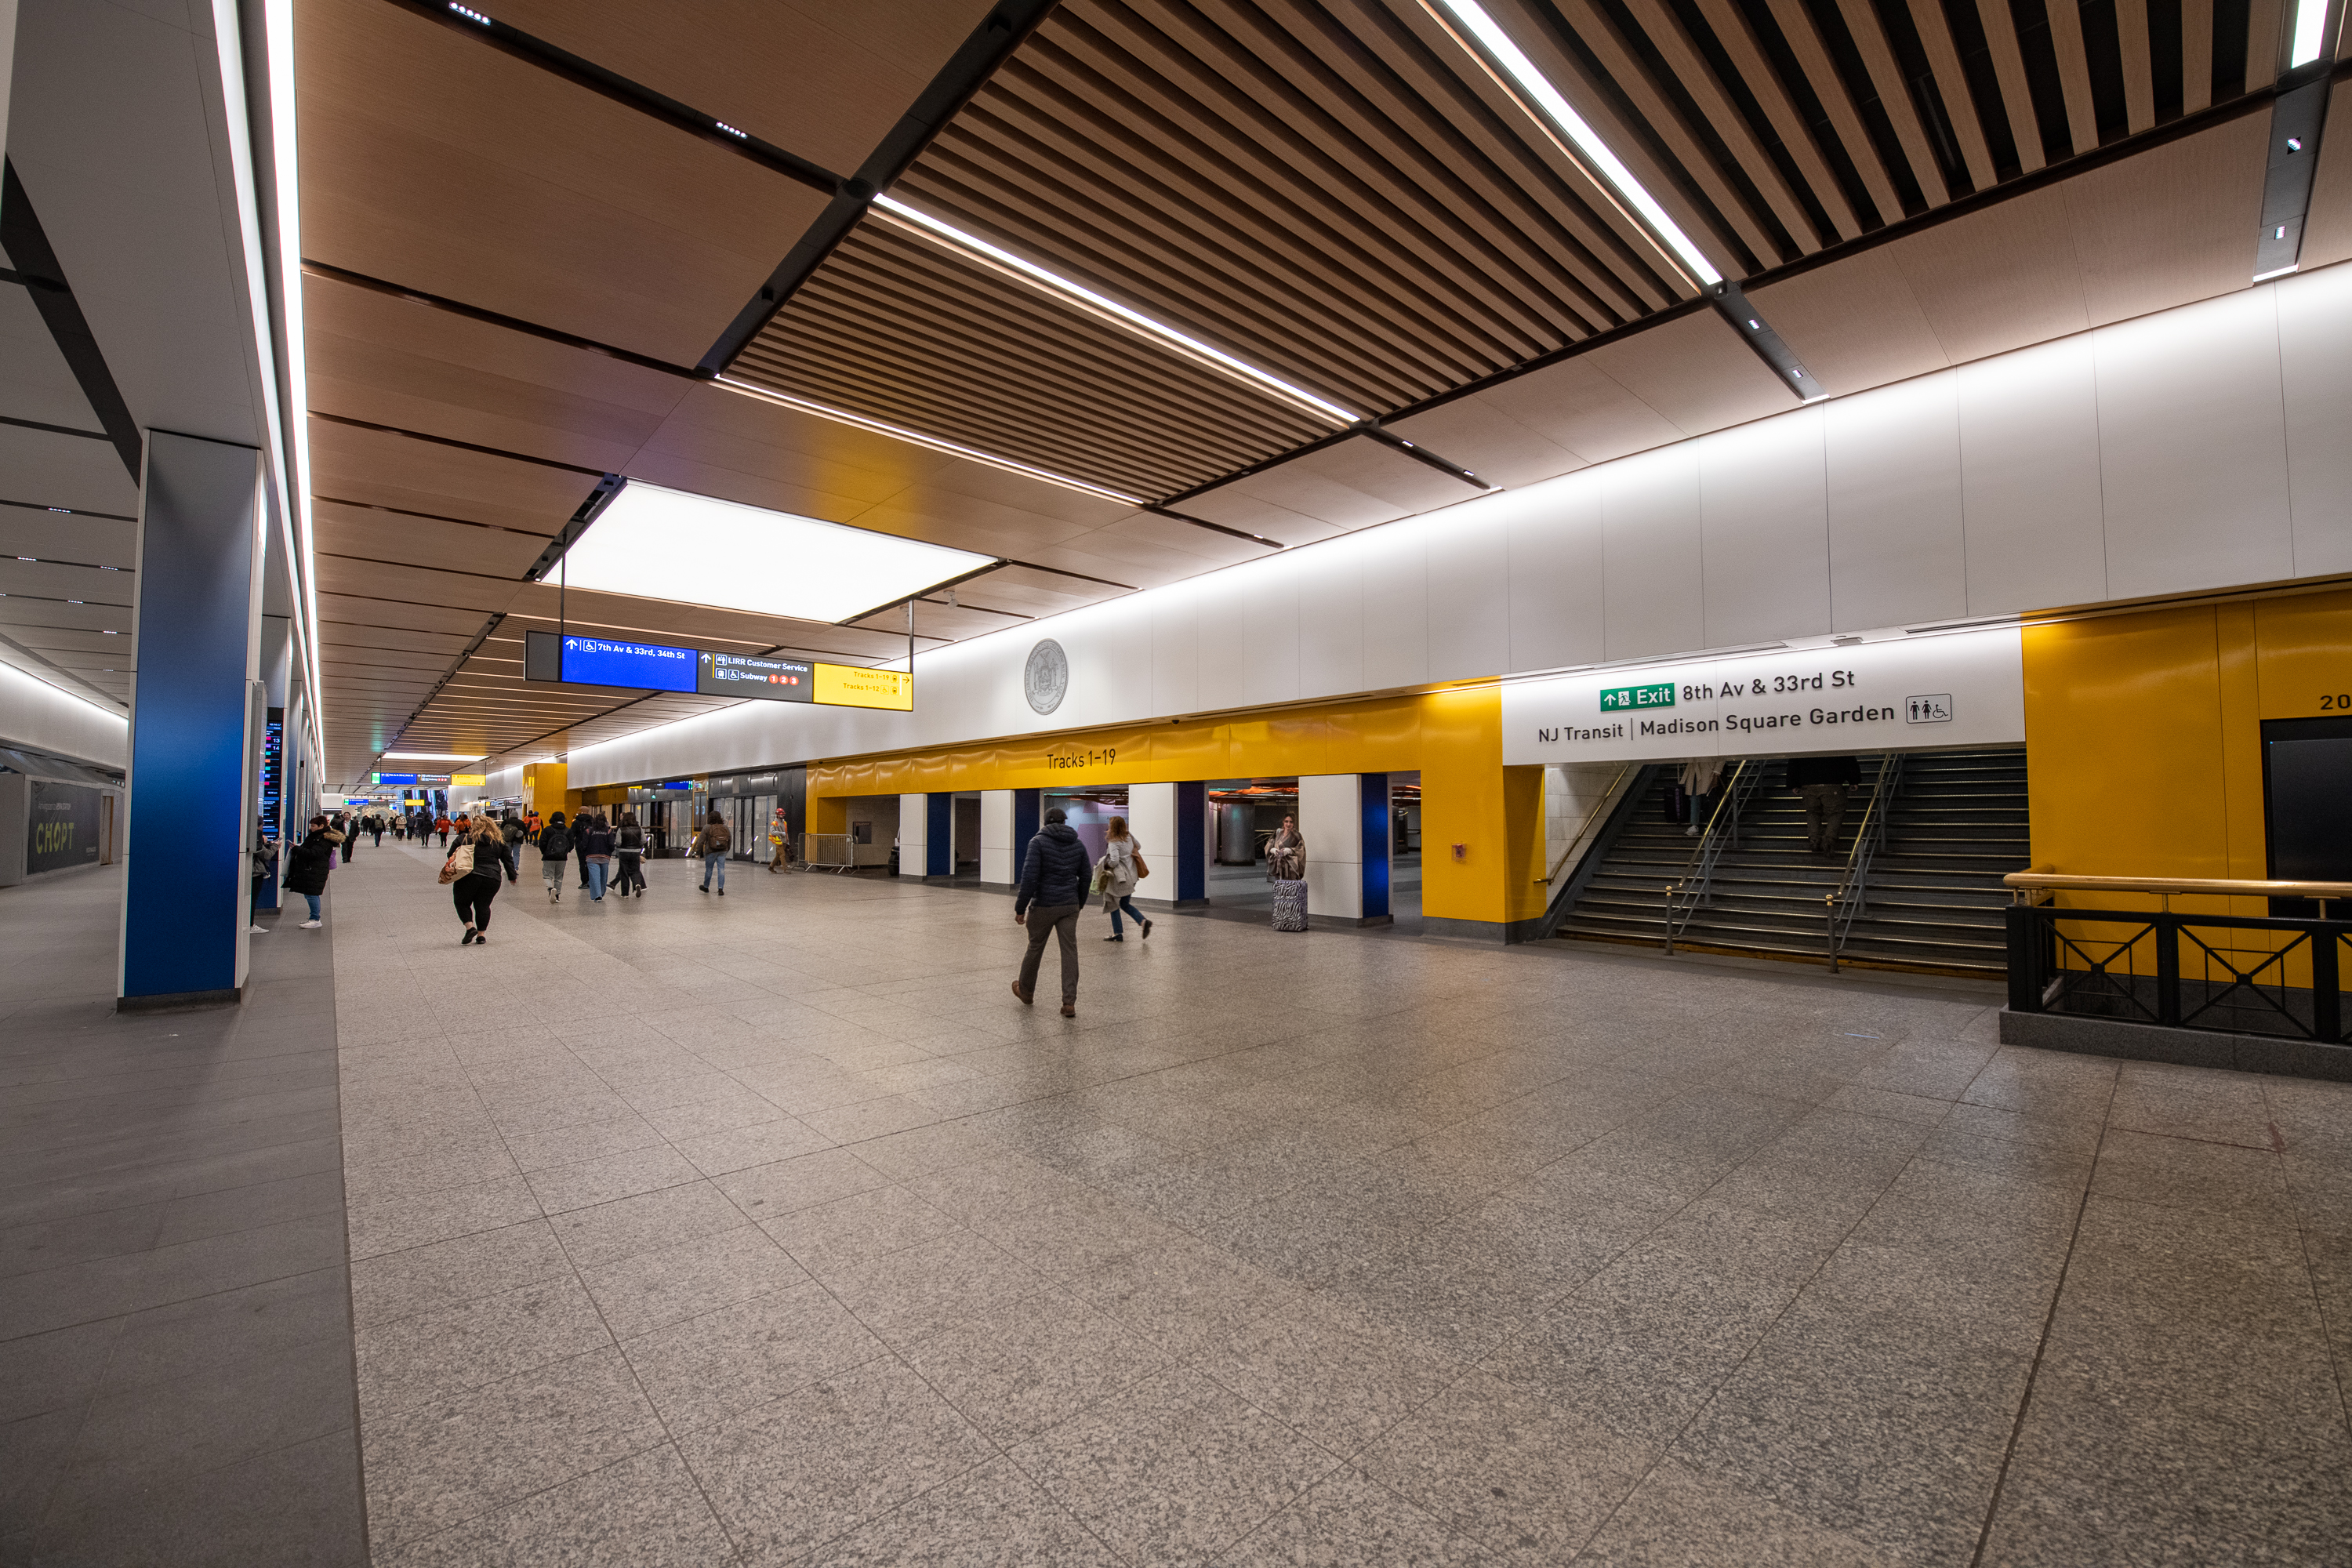 The refurbished concourse at Penn Station